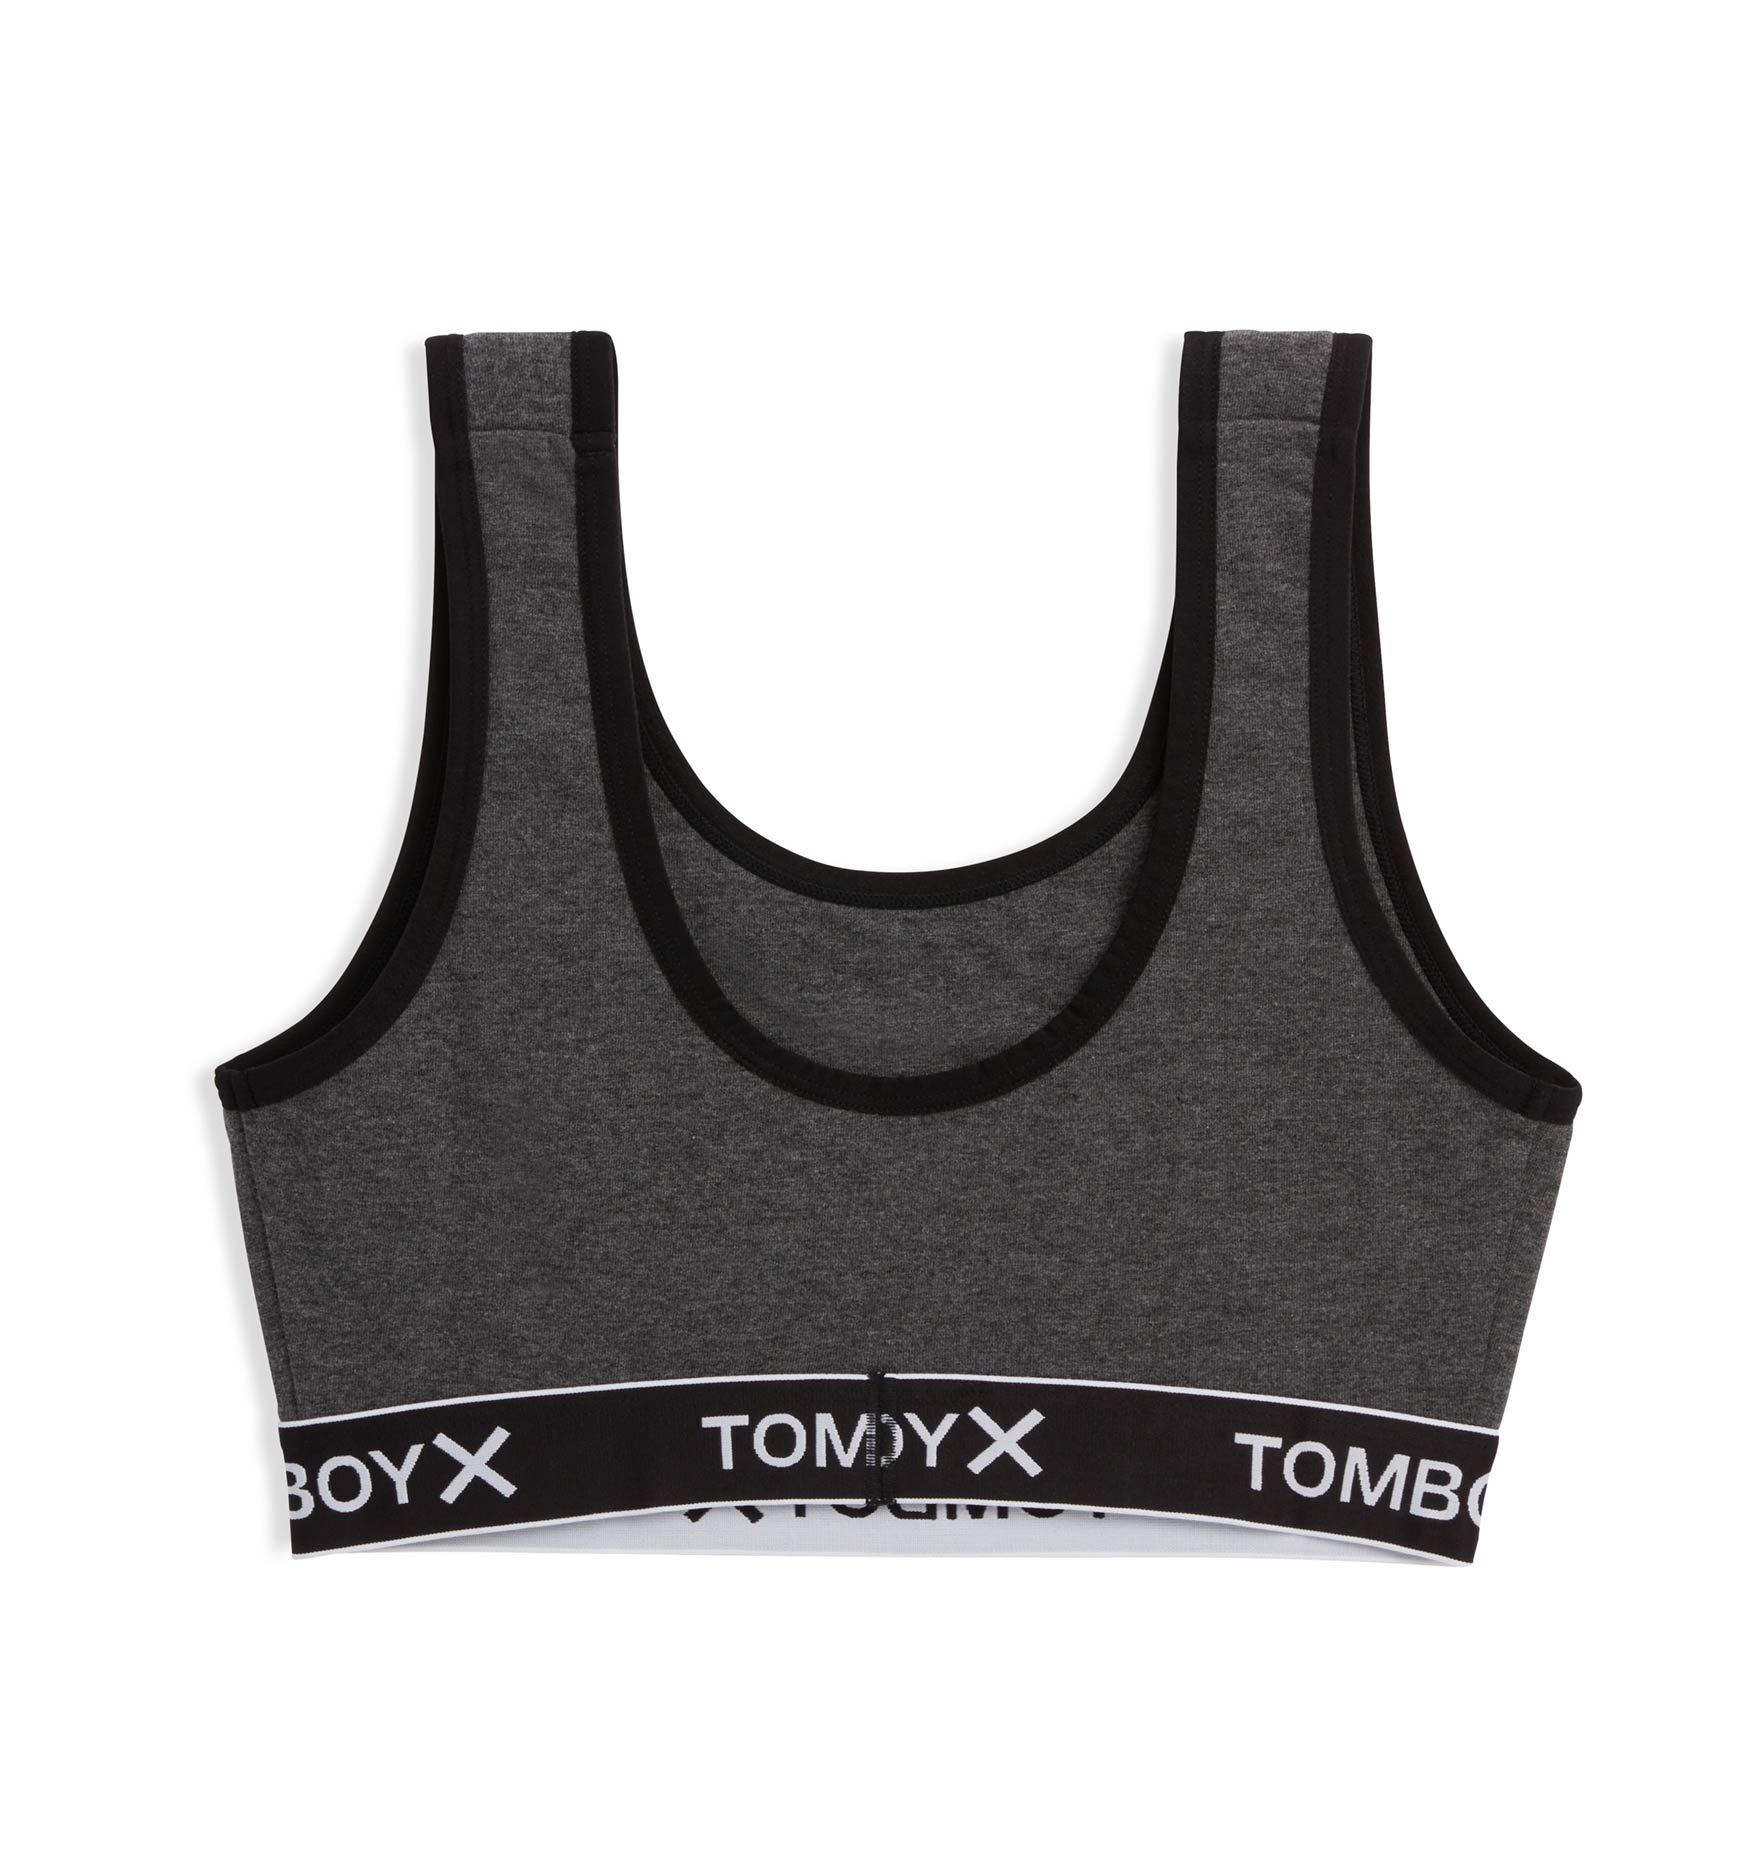 High Impact Bra vs. Regular Bra: What Is the Difference? – TomboyX